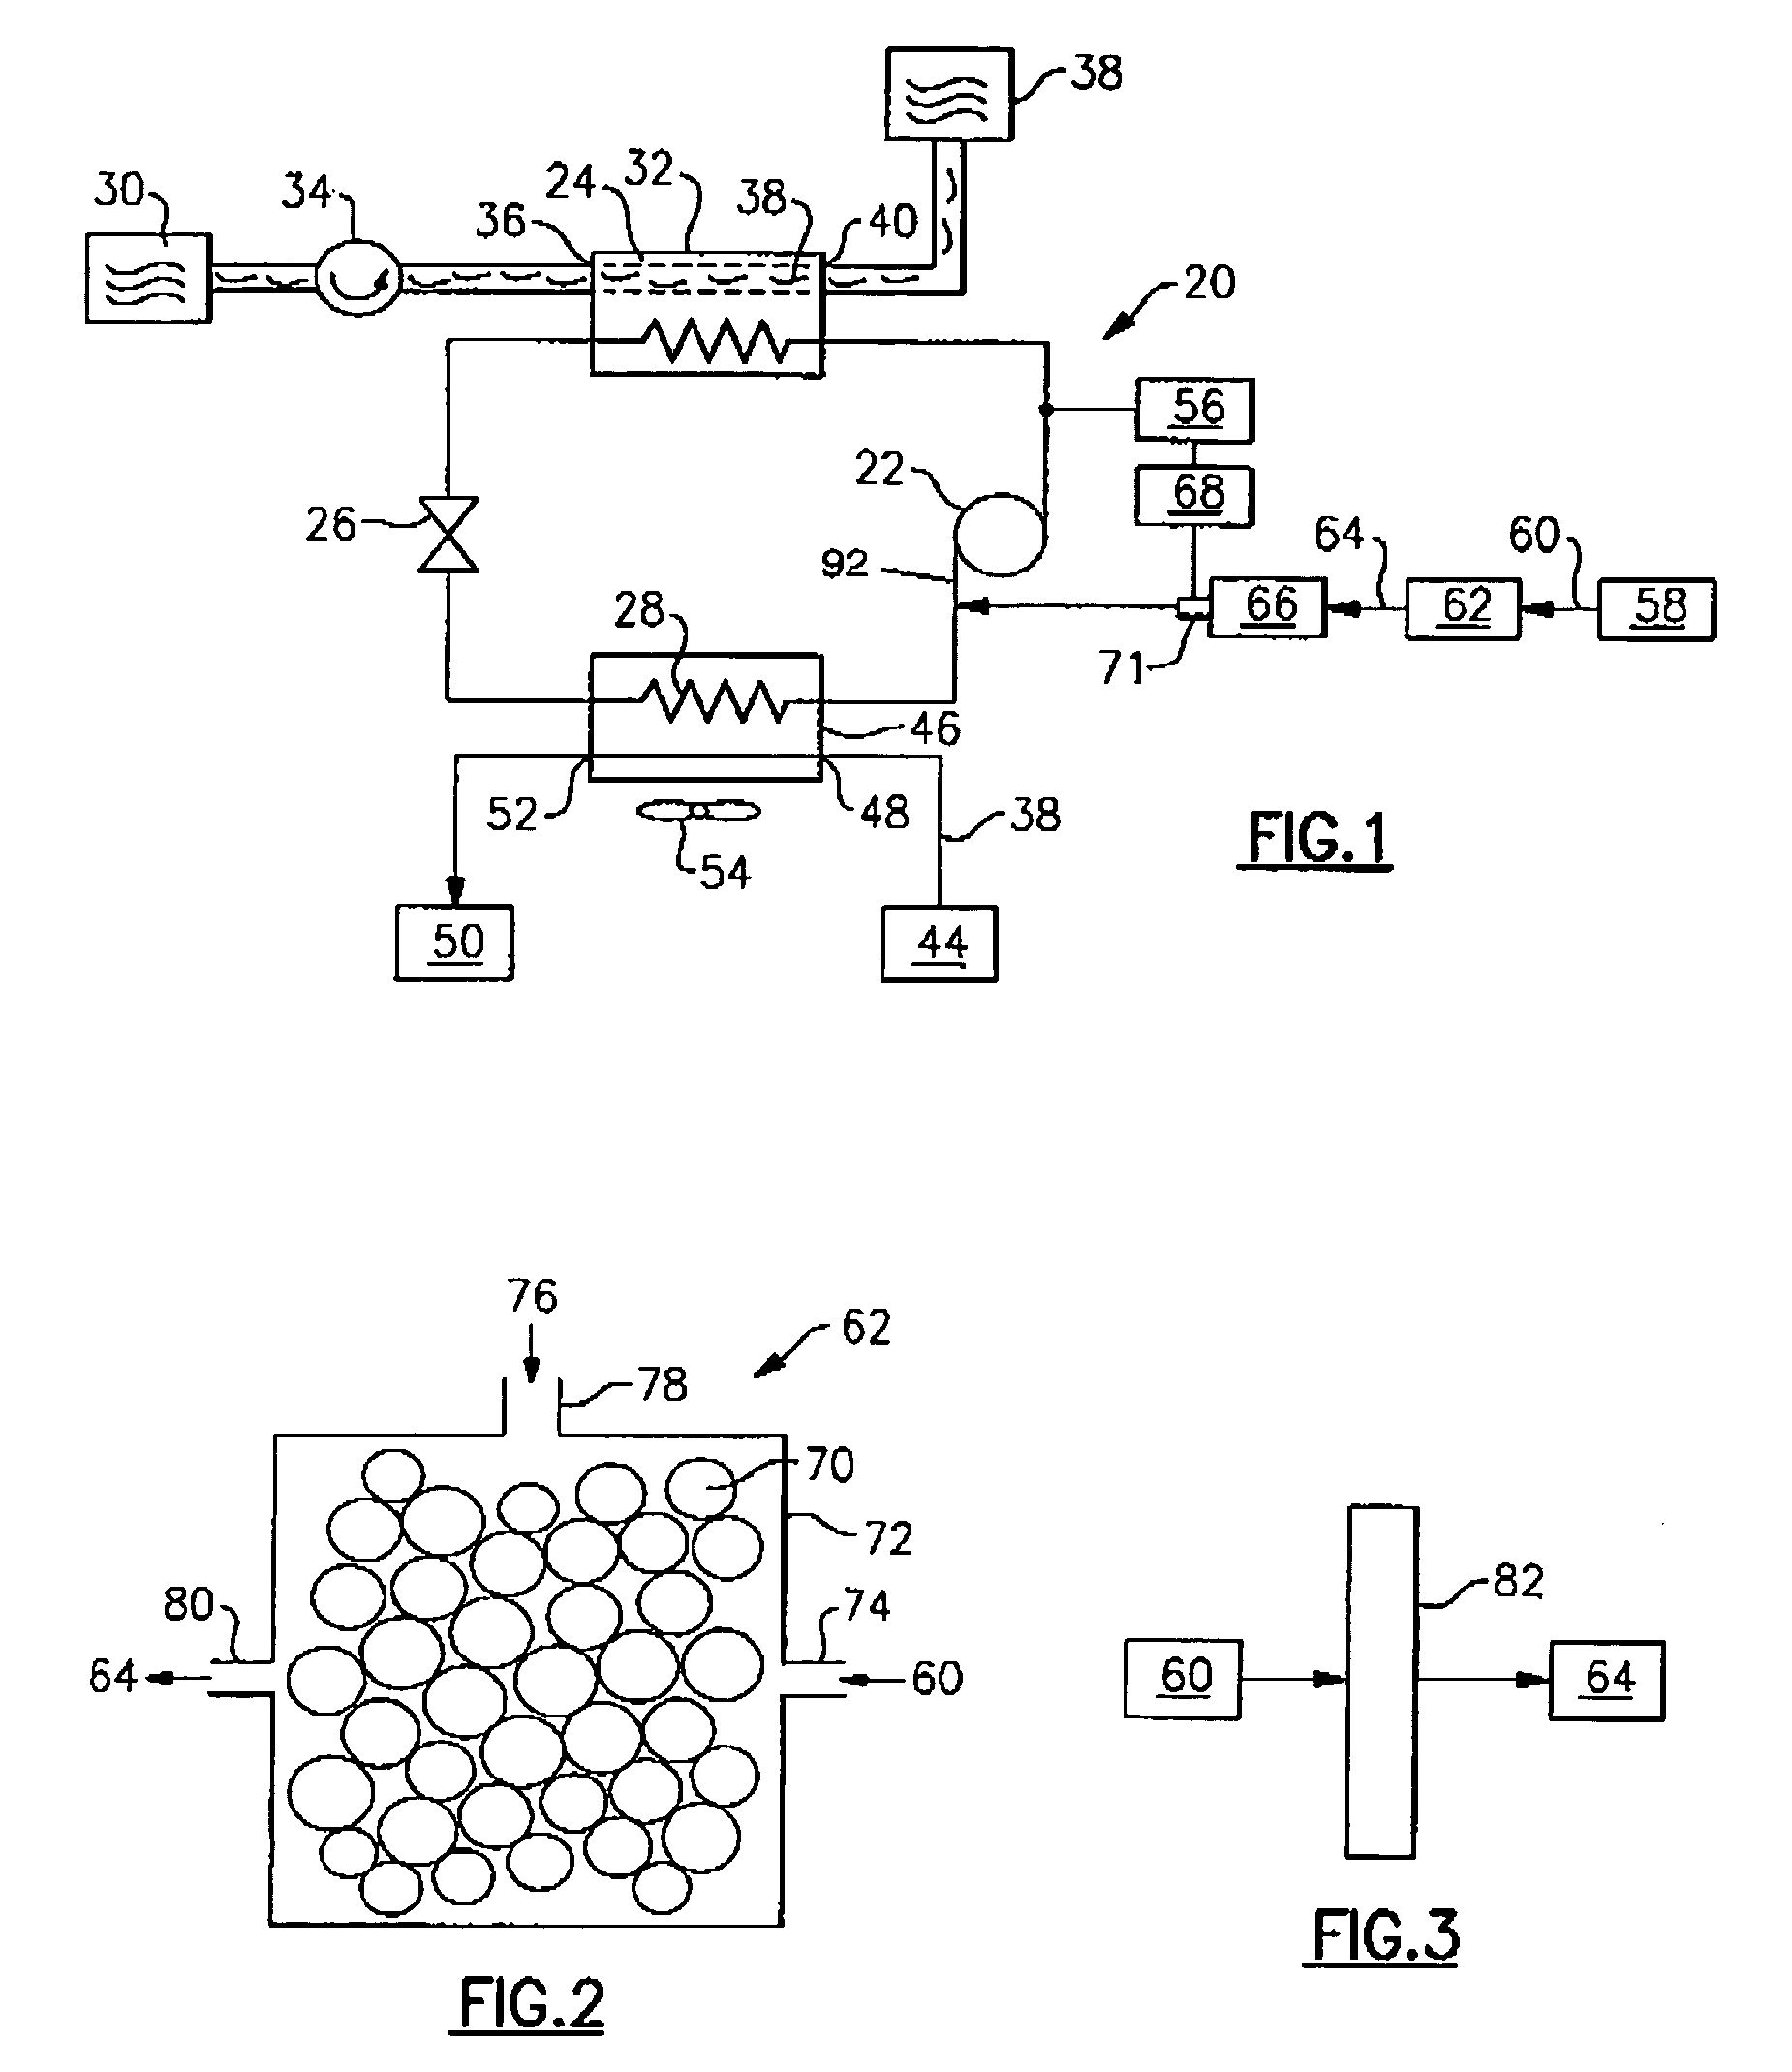 Method for extracting carbon dioxide for use as a refrigerant in a vapor compression system